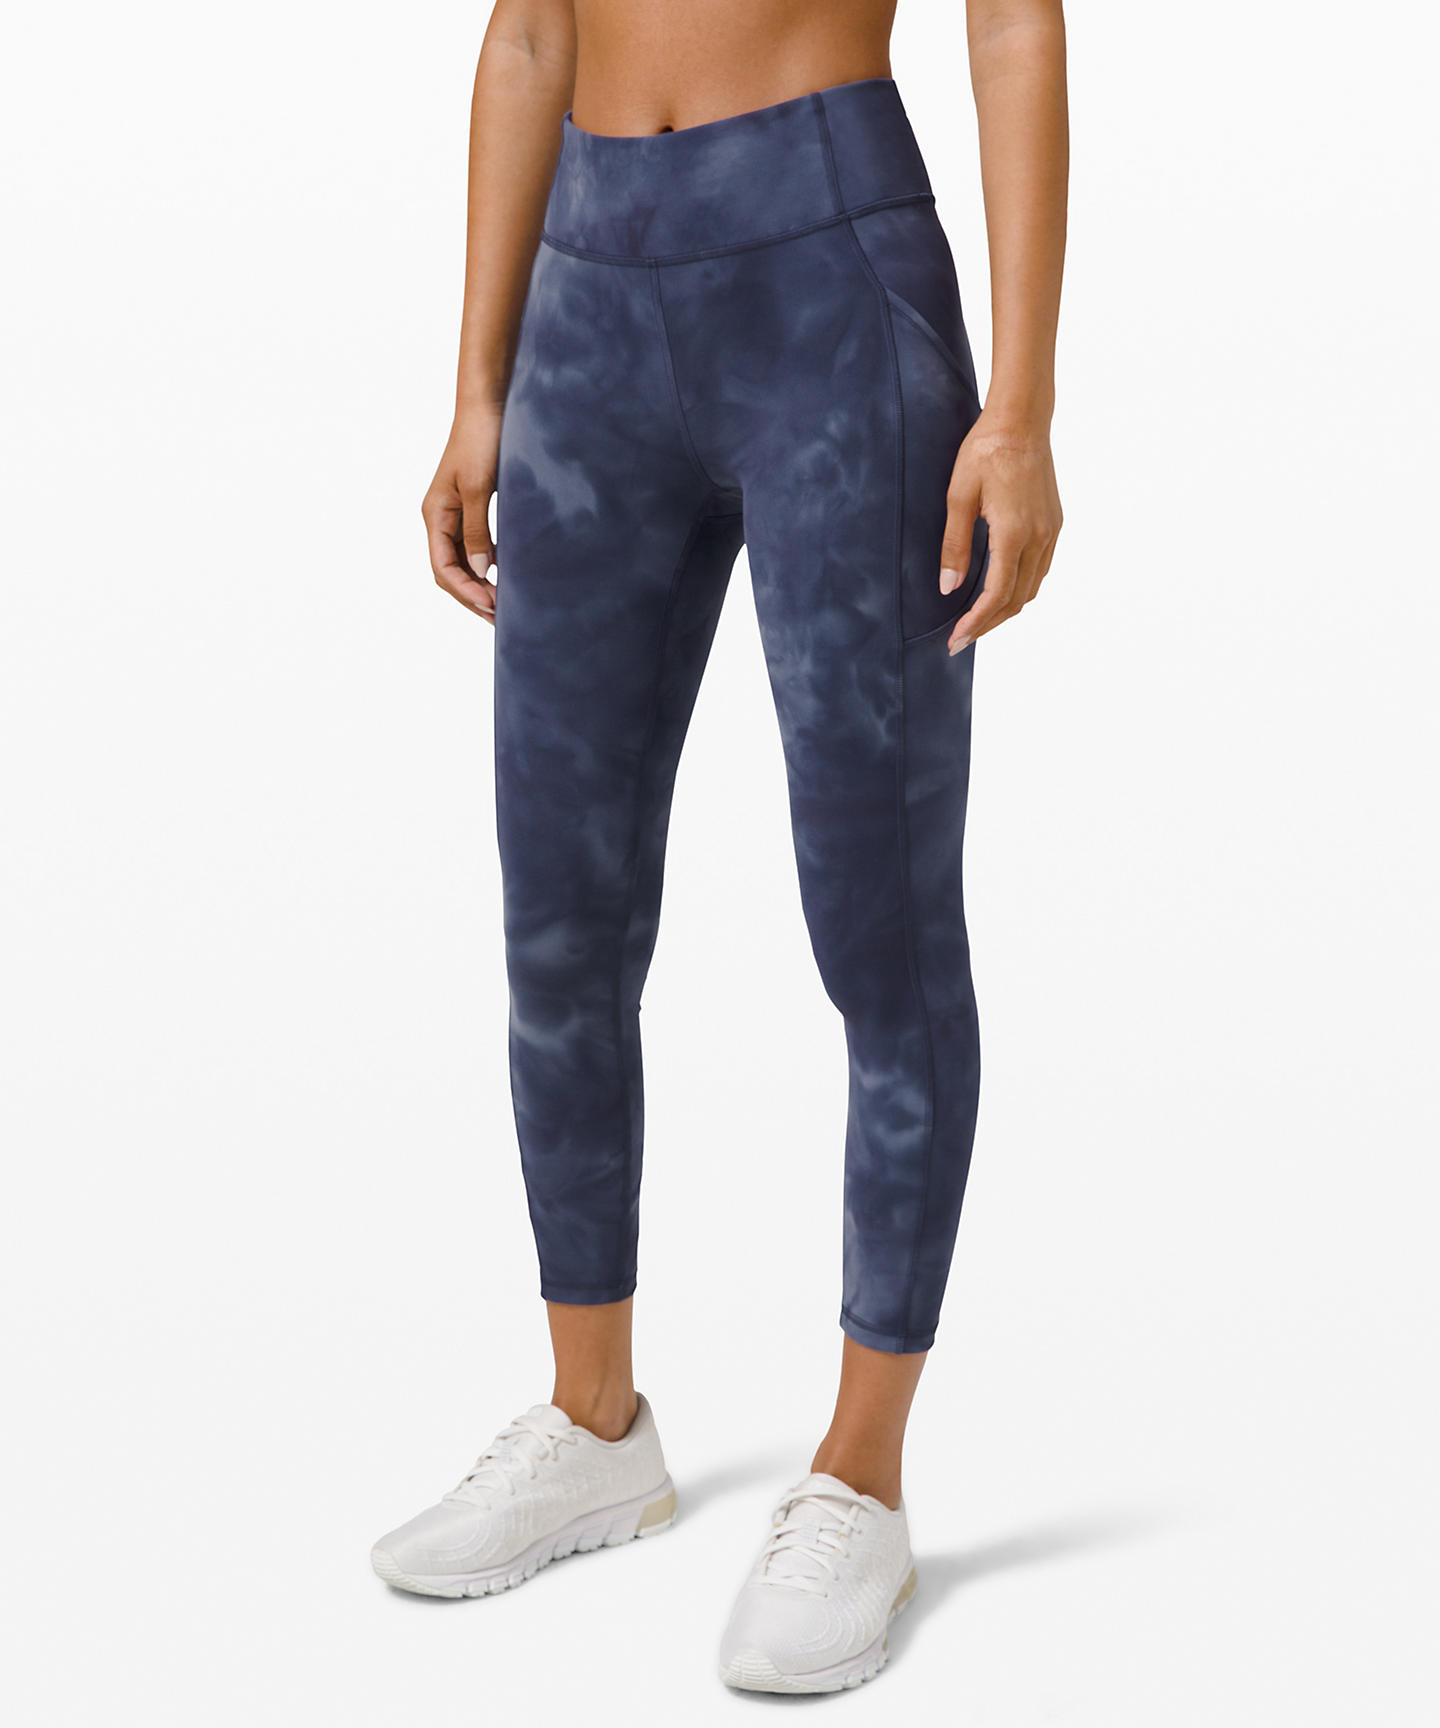 Dispatch From Quarantine: The Lululemon Upload, loungewear trends during shelter-in-place 2020, tie-dye leggings Lululemon, 